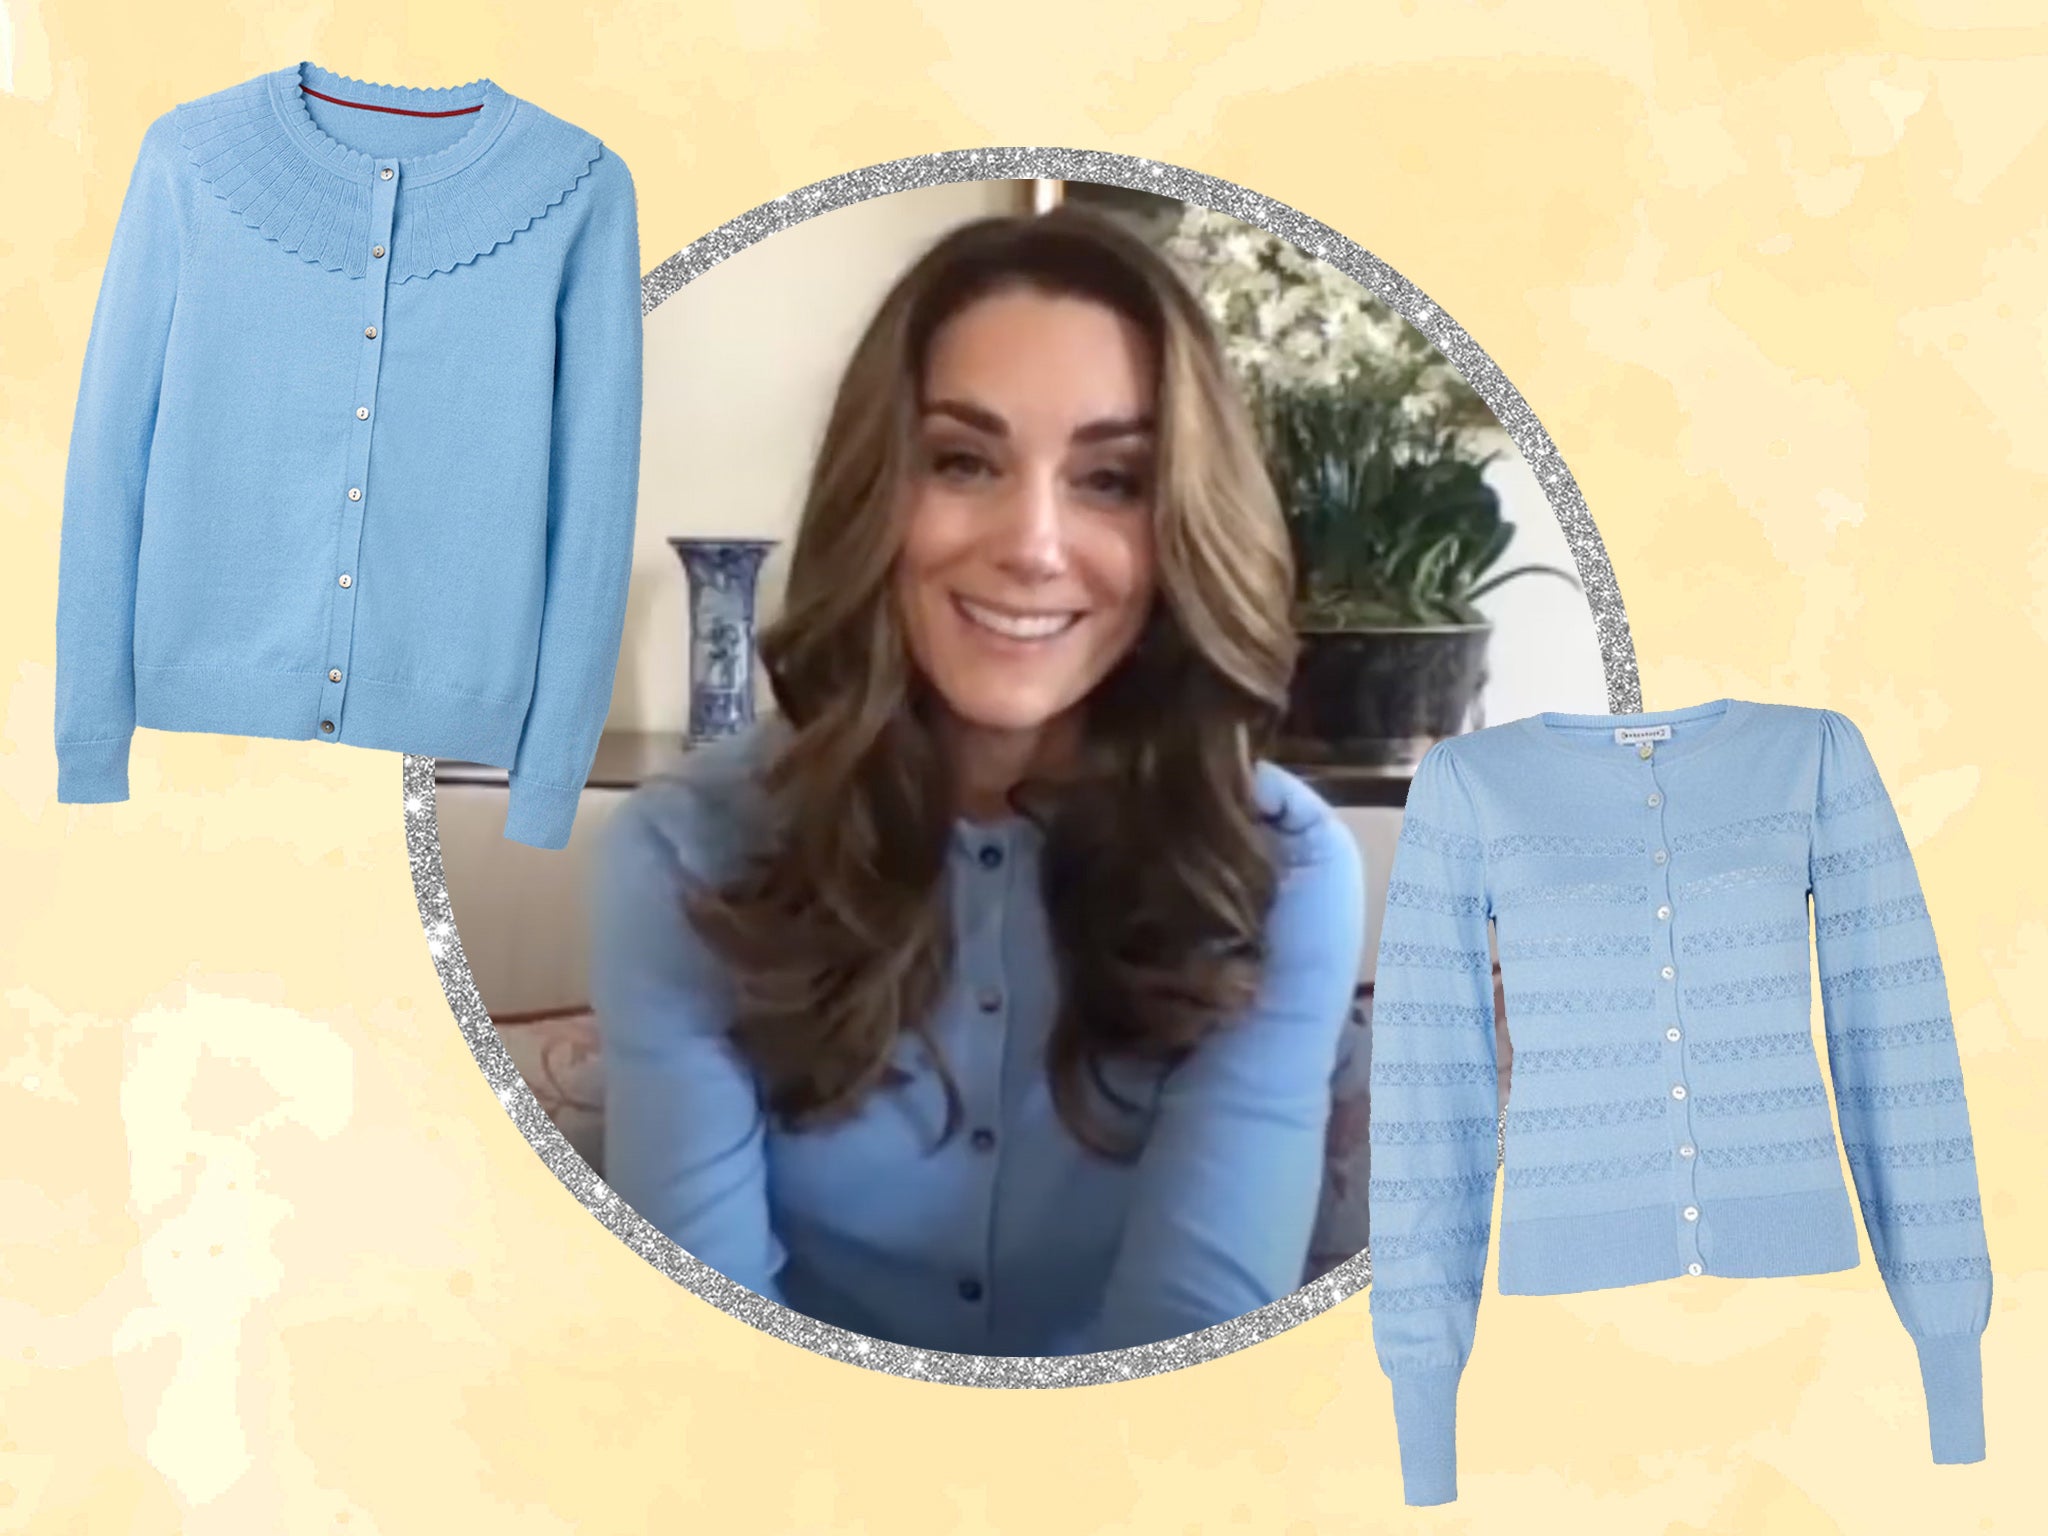 The duchess wore the cardigan during a video call to a nurse in November 2020